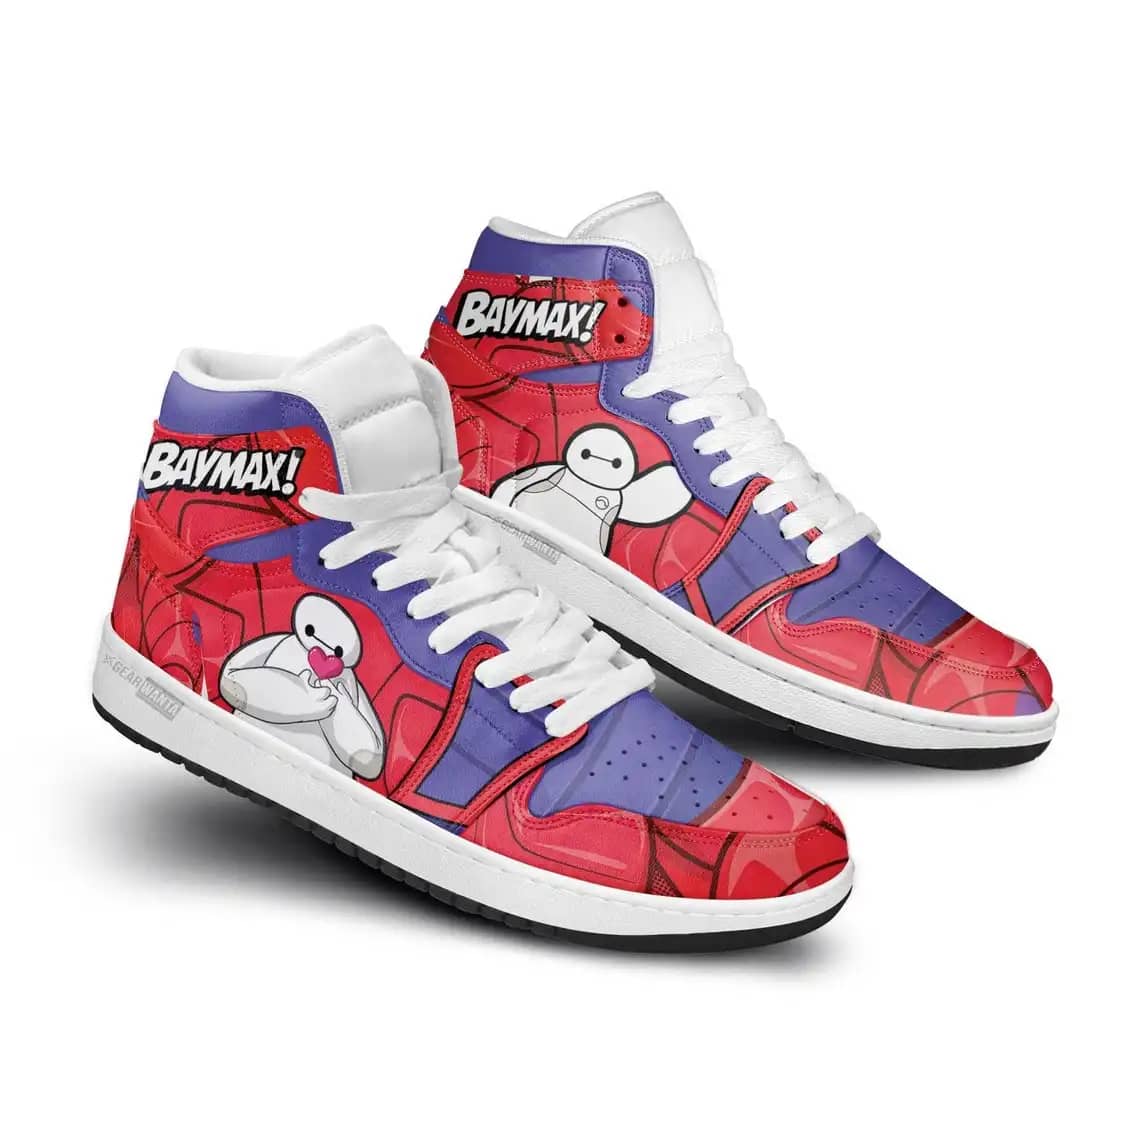 Baymax Super Heroes For Movie Fans - Custom Anime Sneaker For Men And Women Air Jordan Shoes